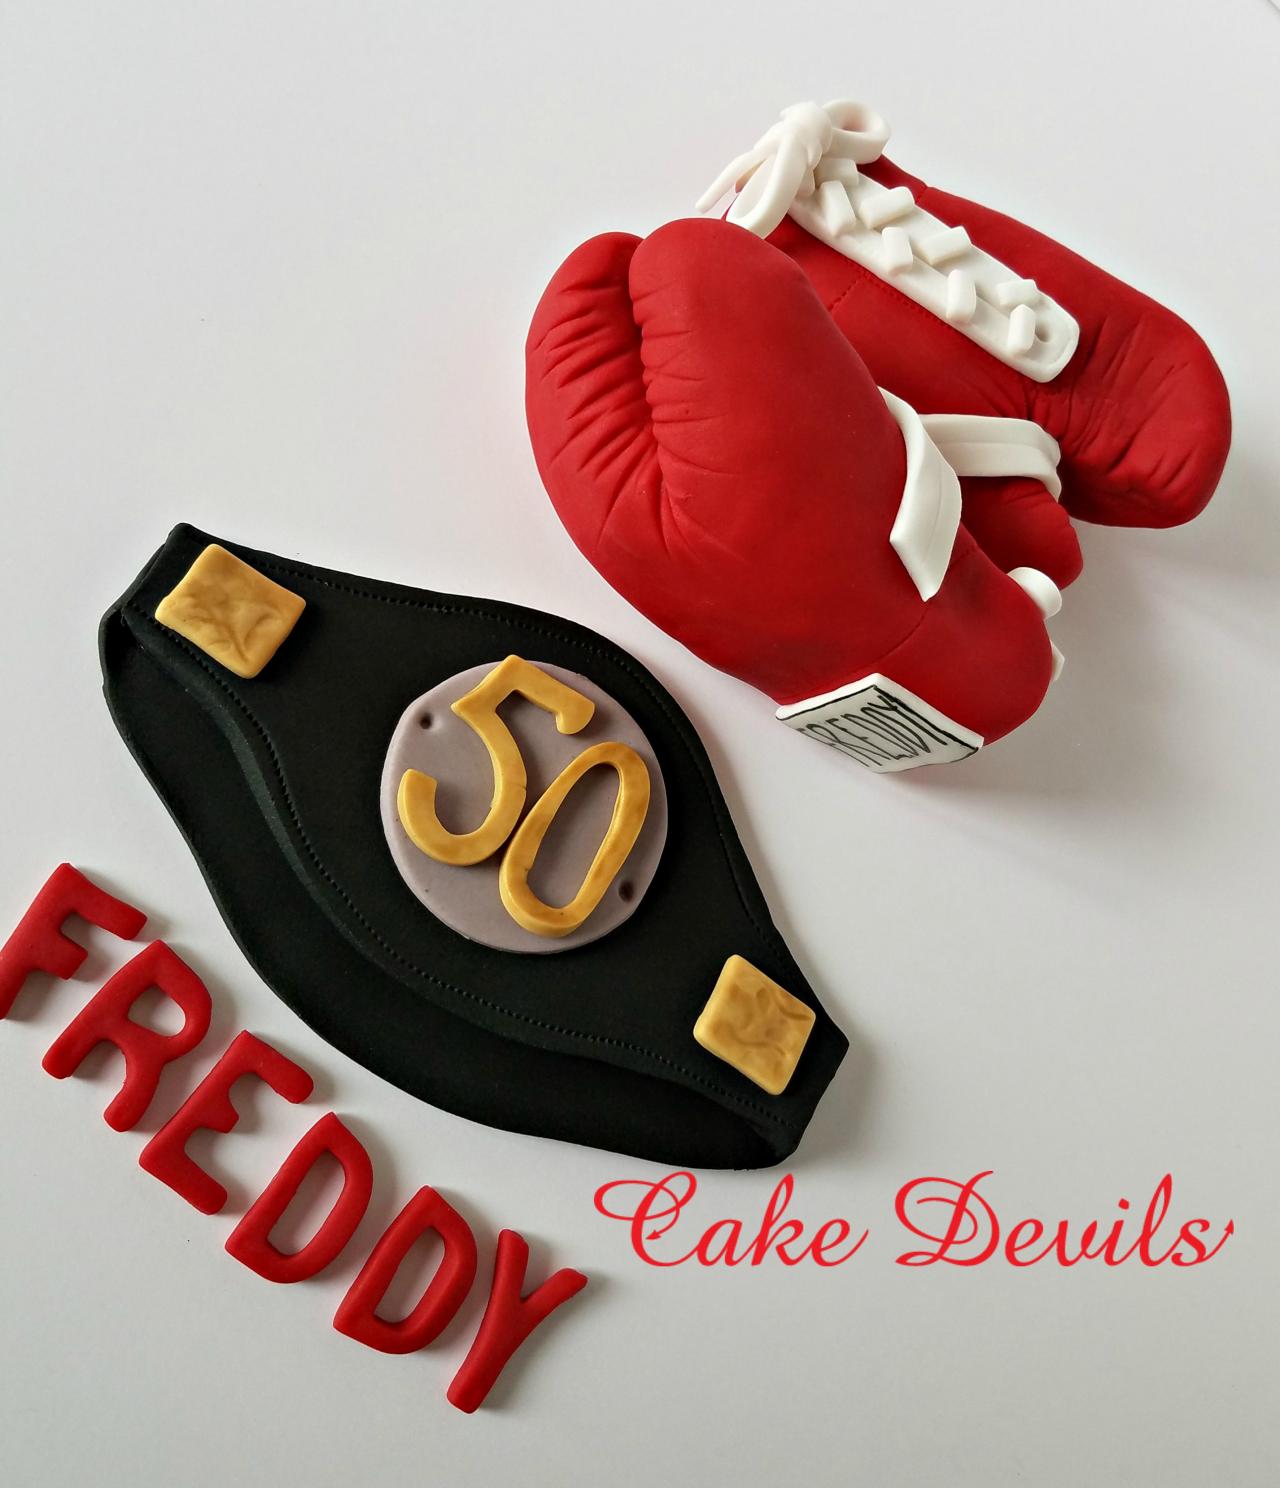 Boxing Gloves Cake Topper, Boxing Belt And Gloves With White Laces, Fondant Boxing Gloves Cake Decorations, Handmade Edible Boxer Cake